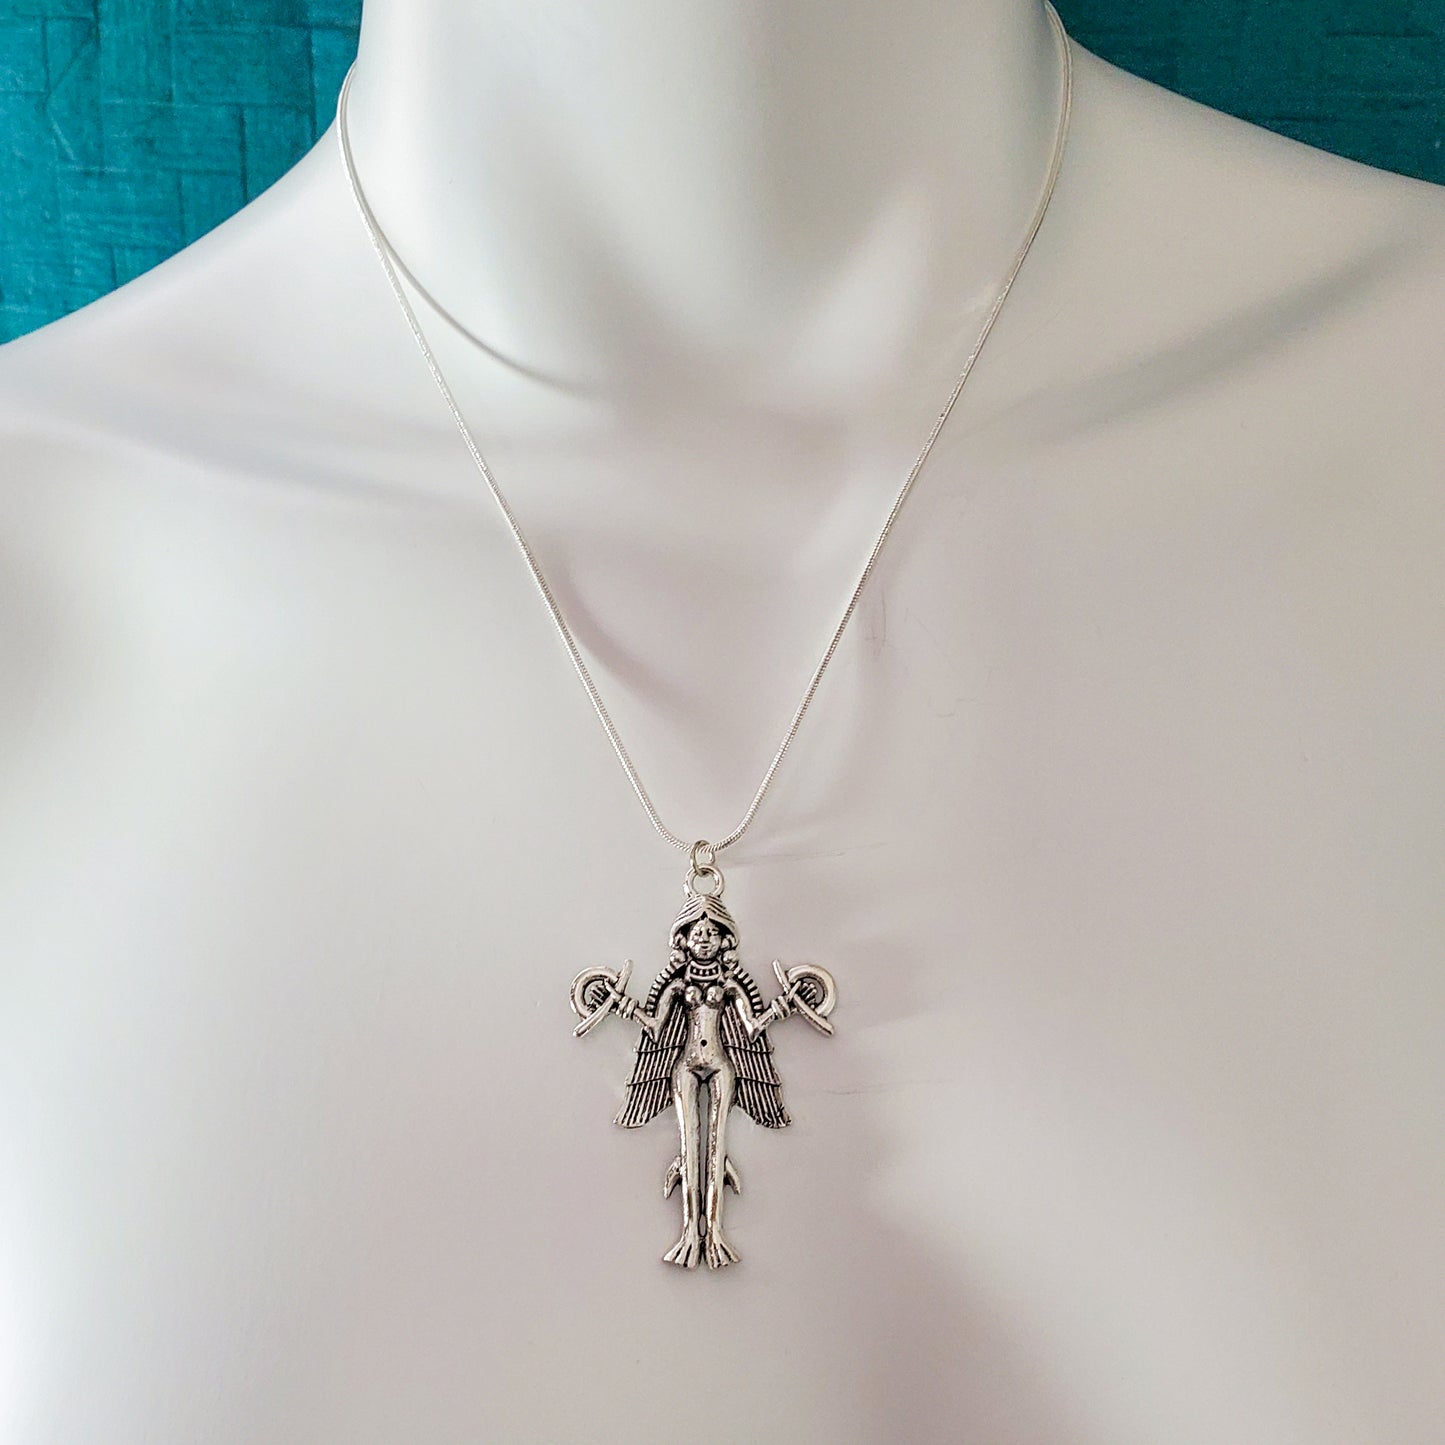 Goddess Lilith Inanna Pendant Necklace 18" Silver Plated Snake Jewelry